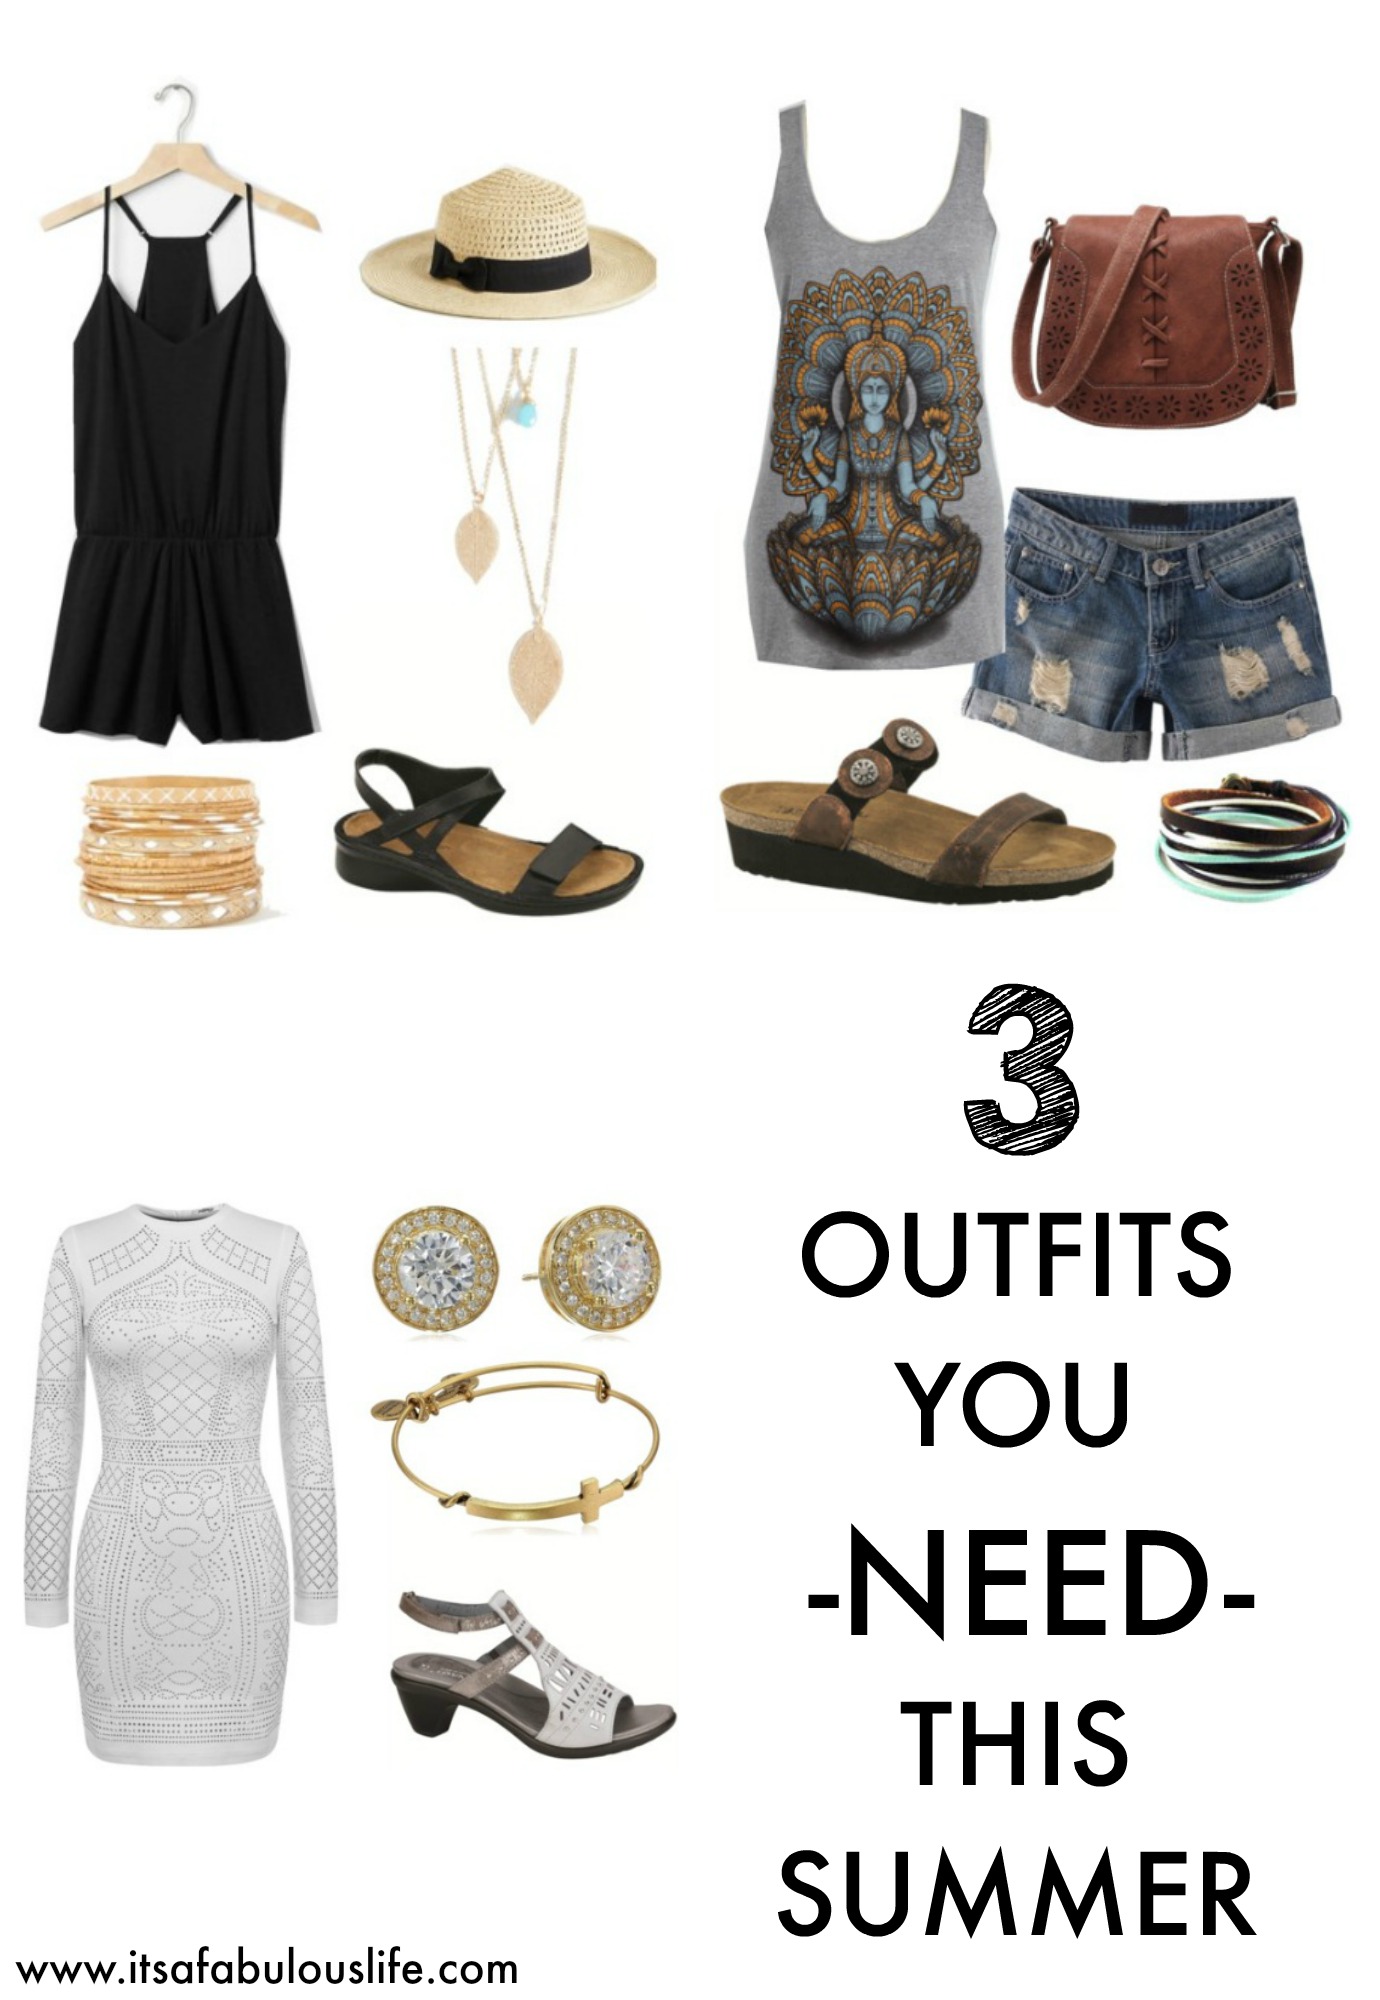 3 outfits you need this summer